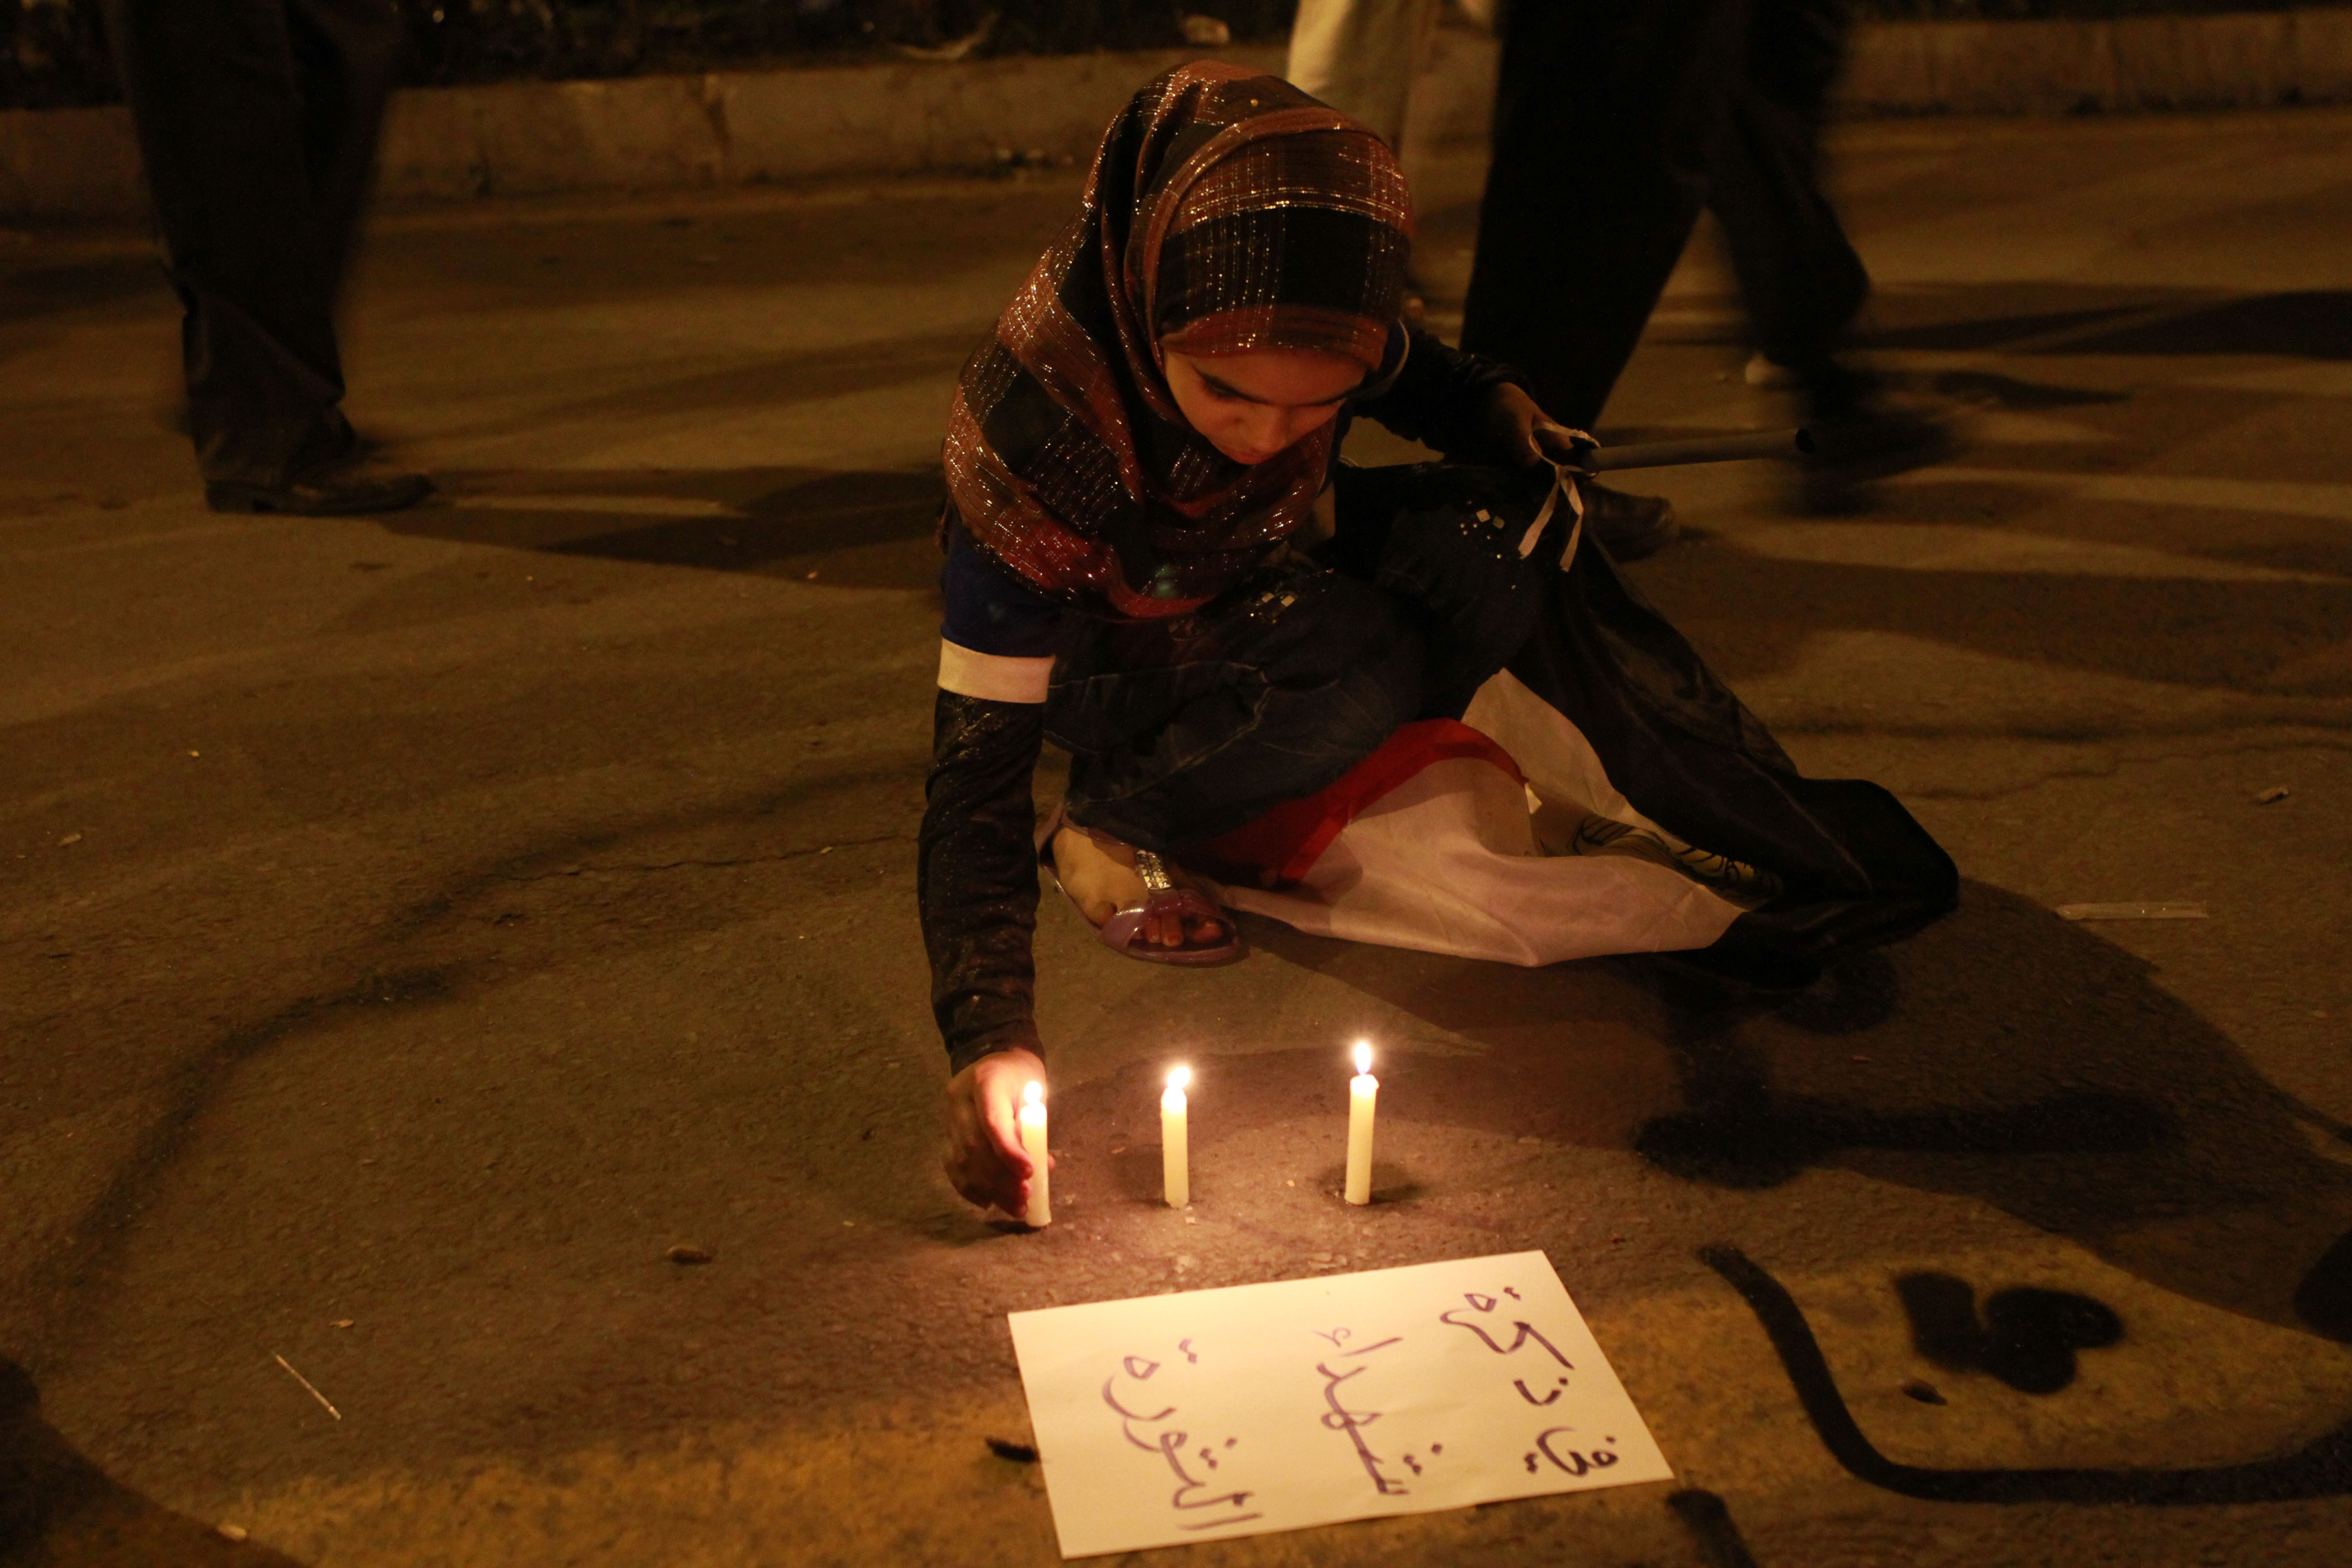 Celebrating the resignation of President Mubarak, Cairo, Egypt, 11 February 2011. Lighting candles &quot;in memory of the revolution's martyrs&quot;.